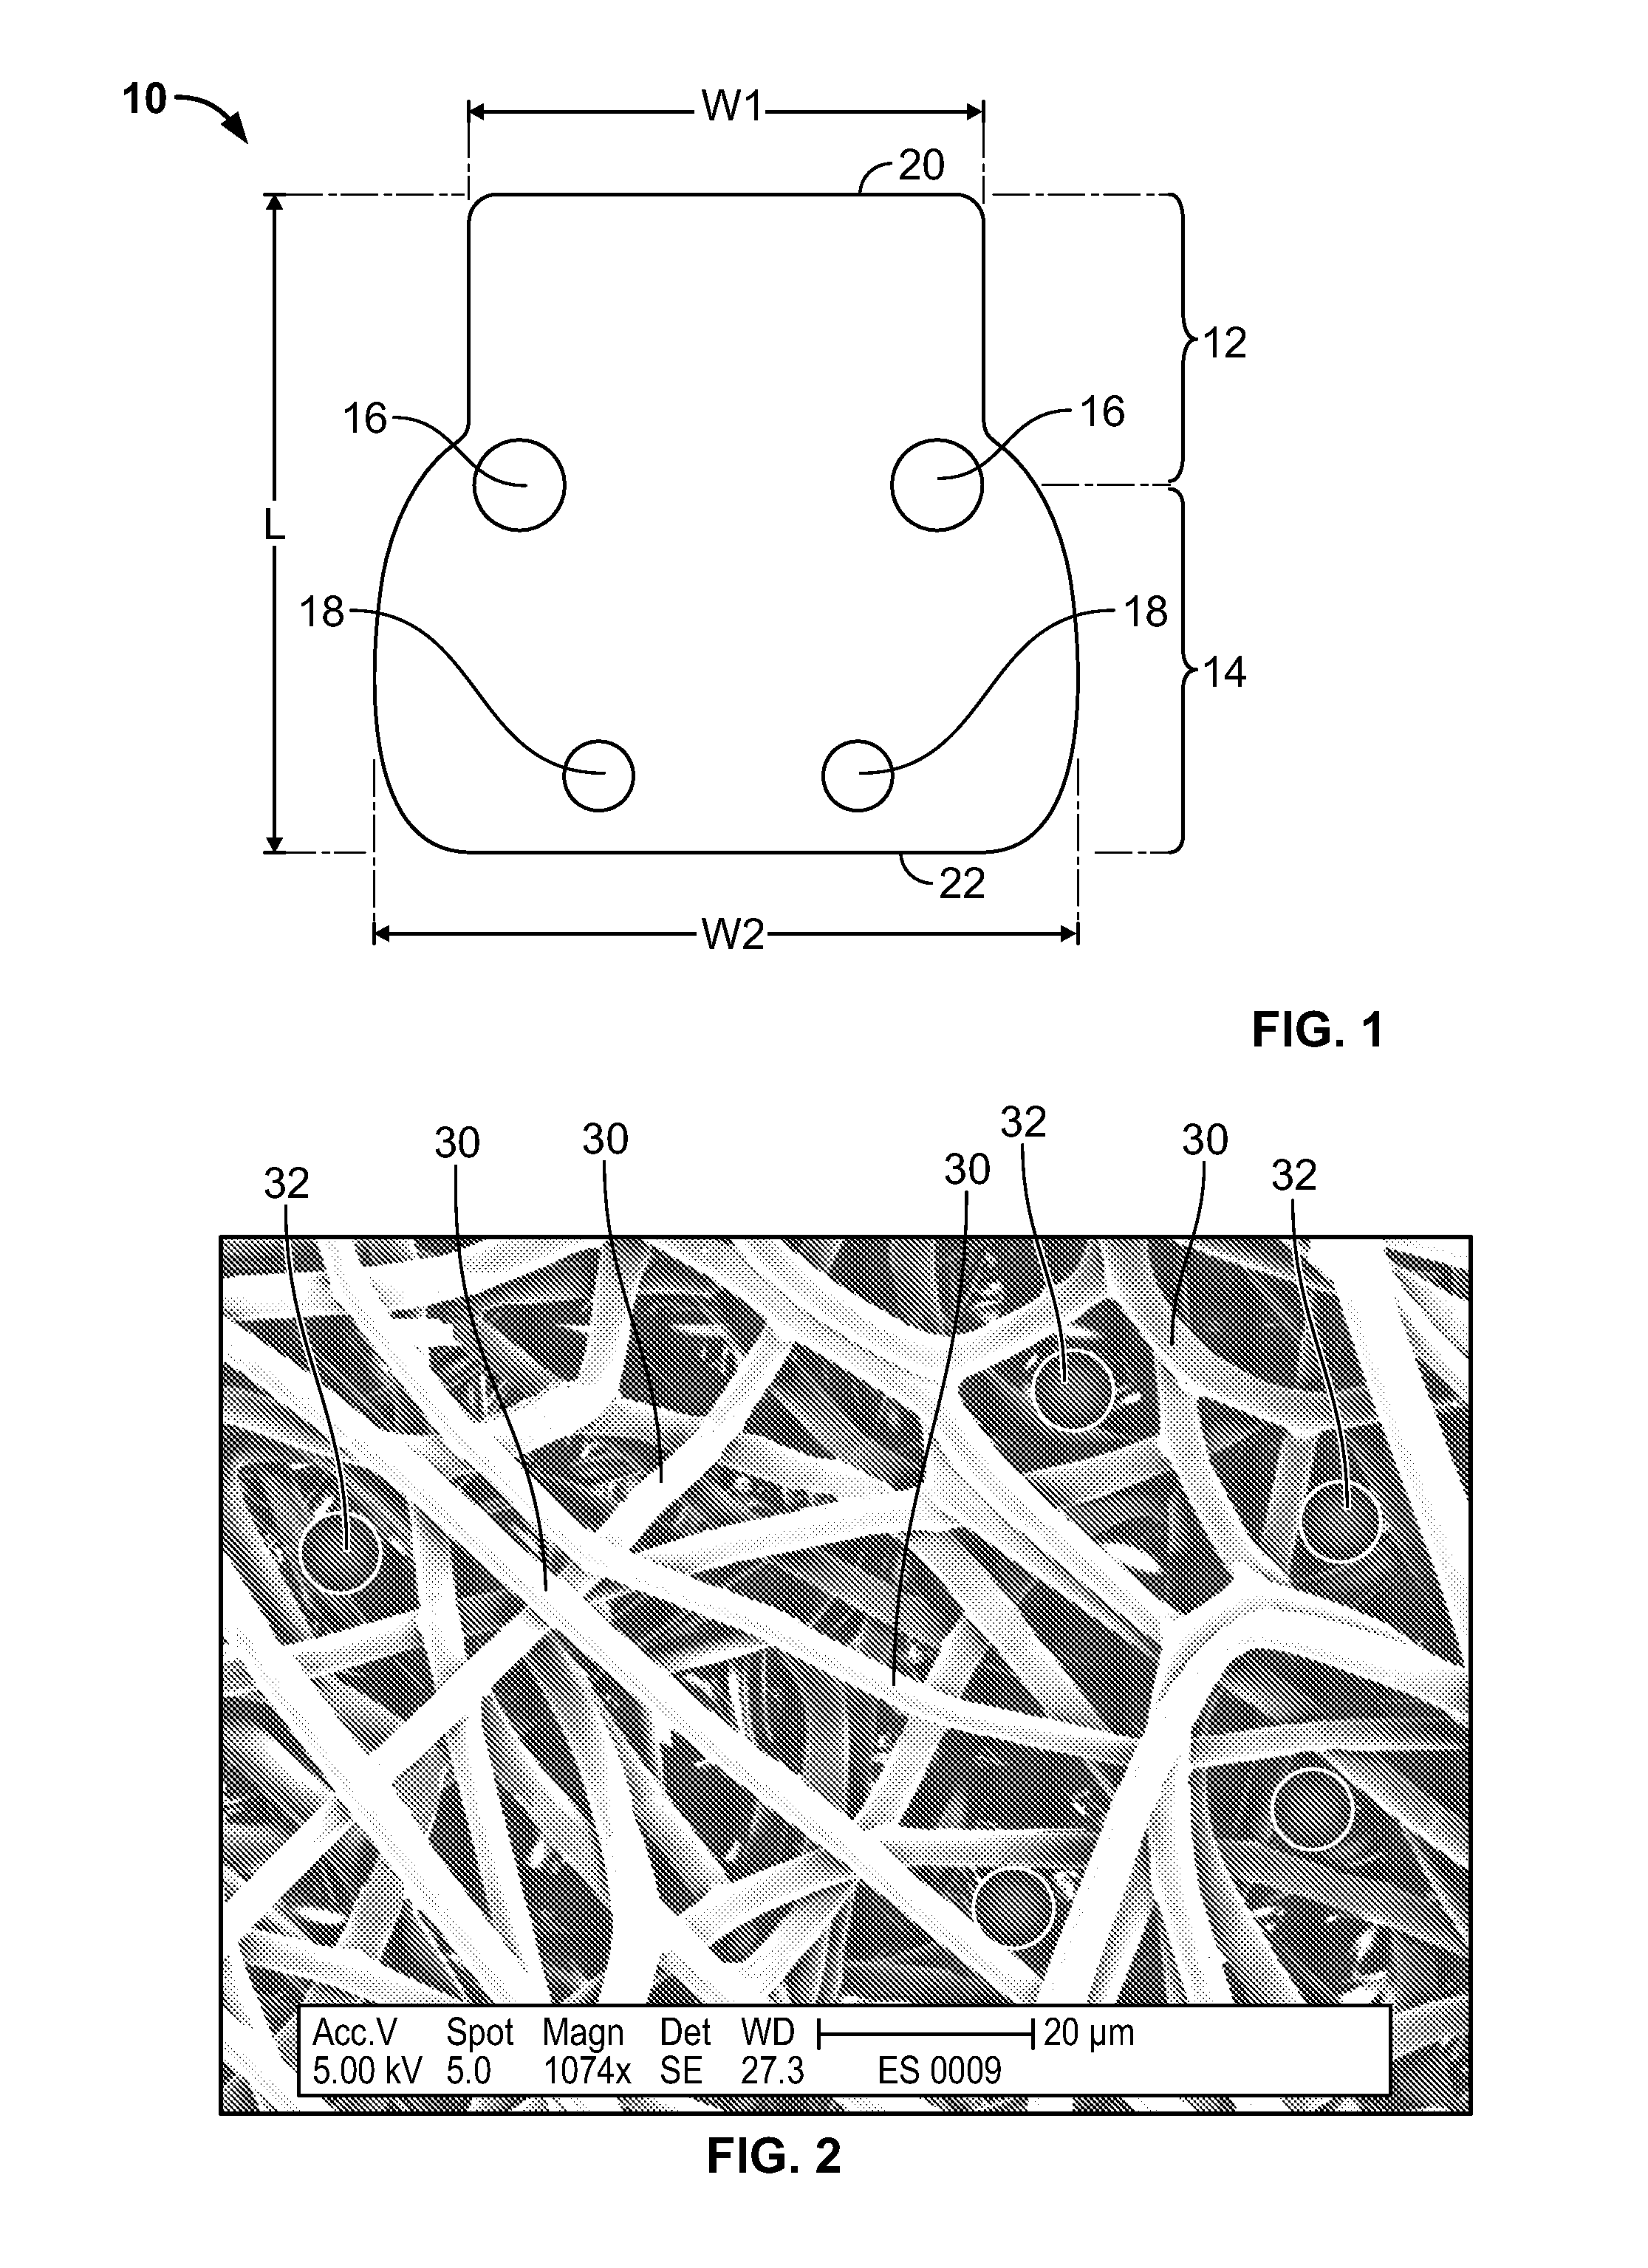 Fiber matrix for maintaining space in soft tissues